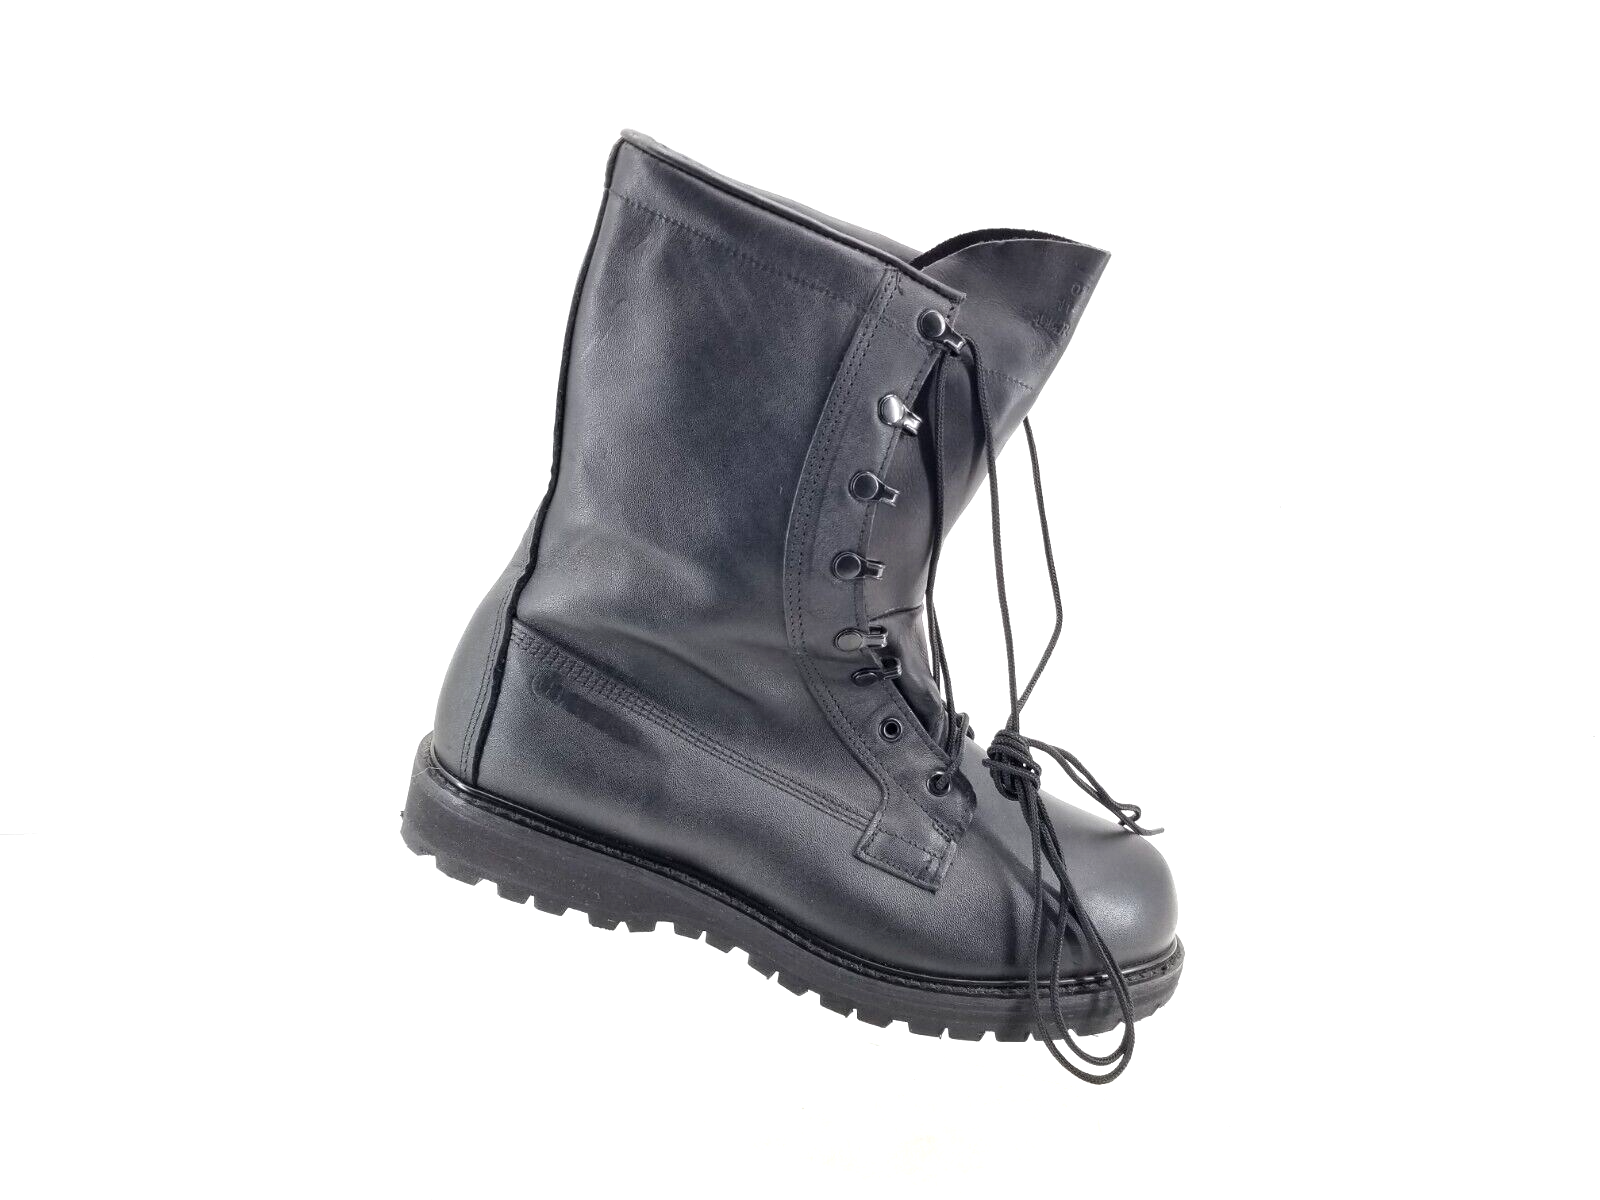 Bates 11460 Gore-Tex ICWB Police Military Combat Boots US Men's 11.5 R Leather - $74.96